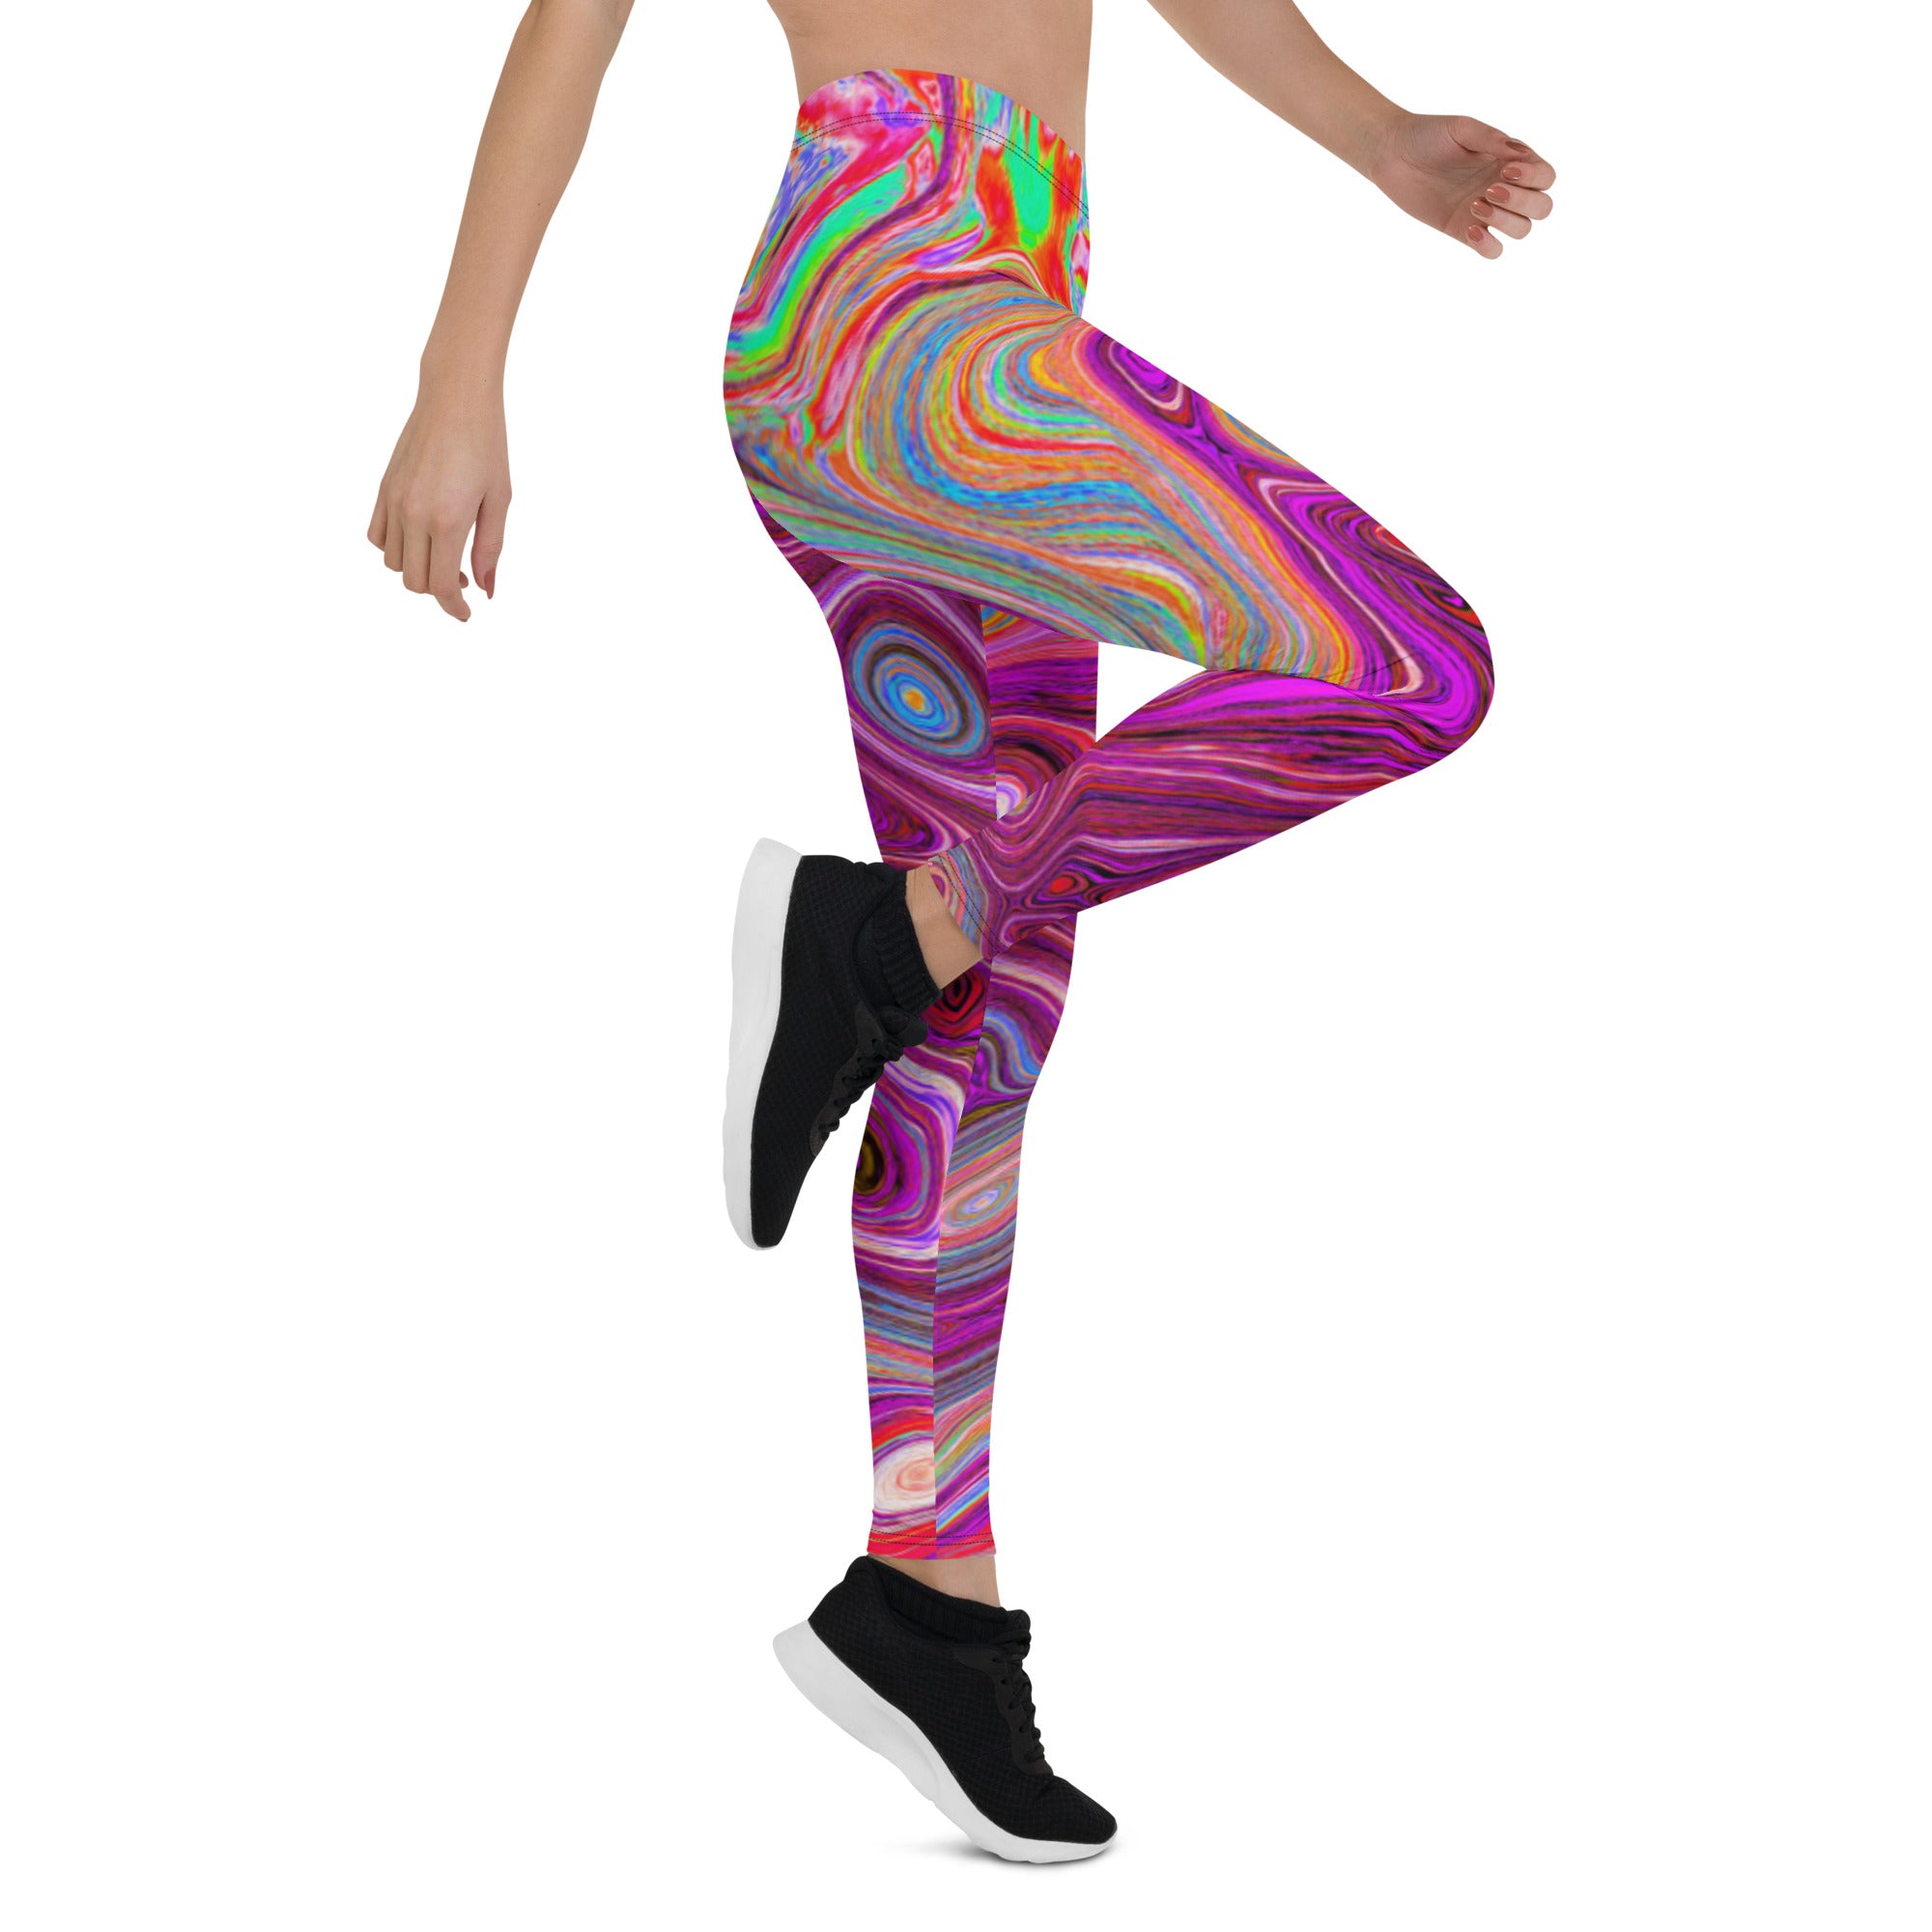 Leggings for Women, Trippy Abstract Cool Magenta Rainbow Colors Retro Art